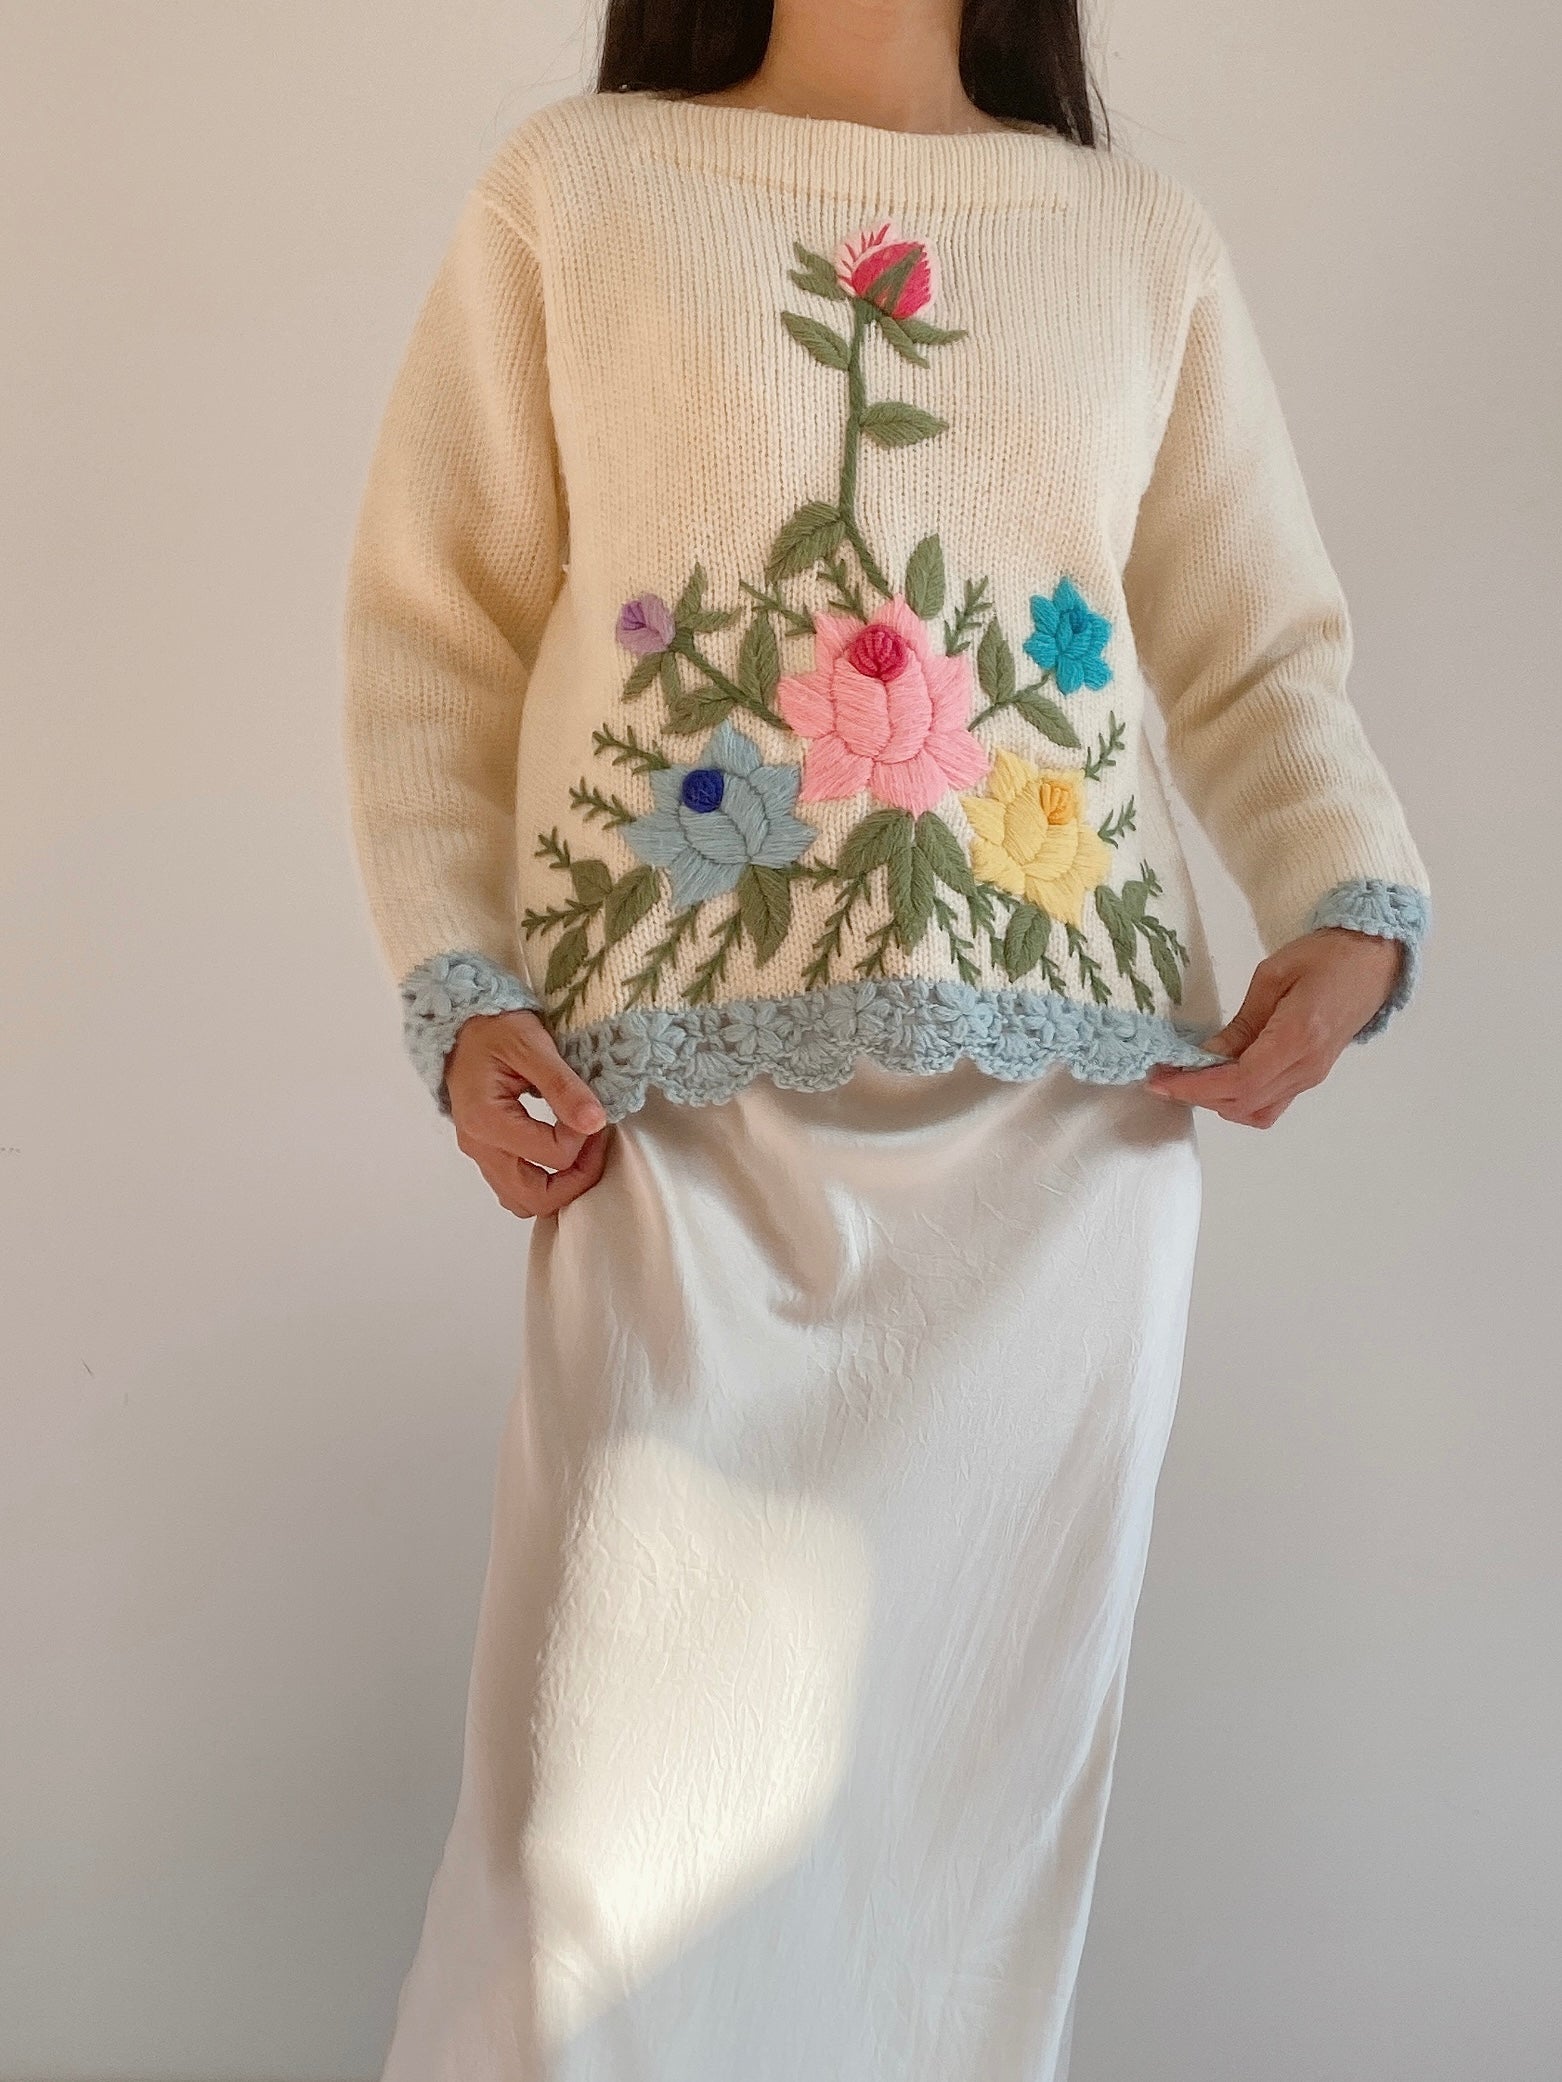 Vintage Embroidered Floral Sweater - S